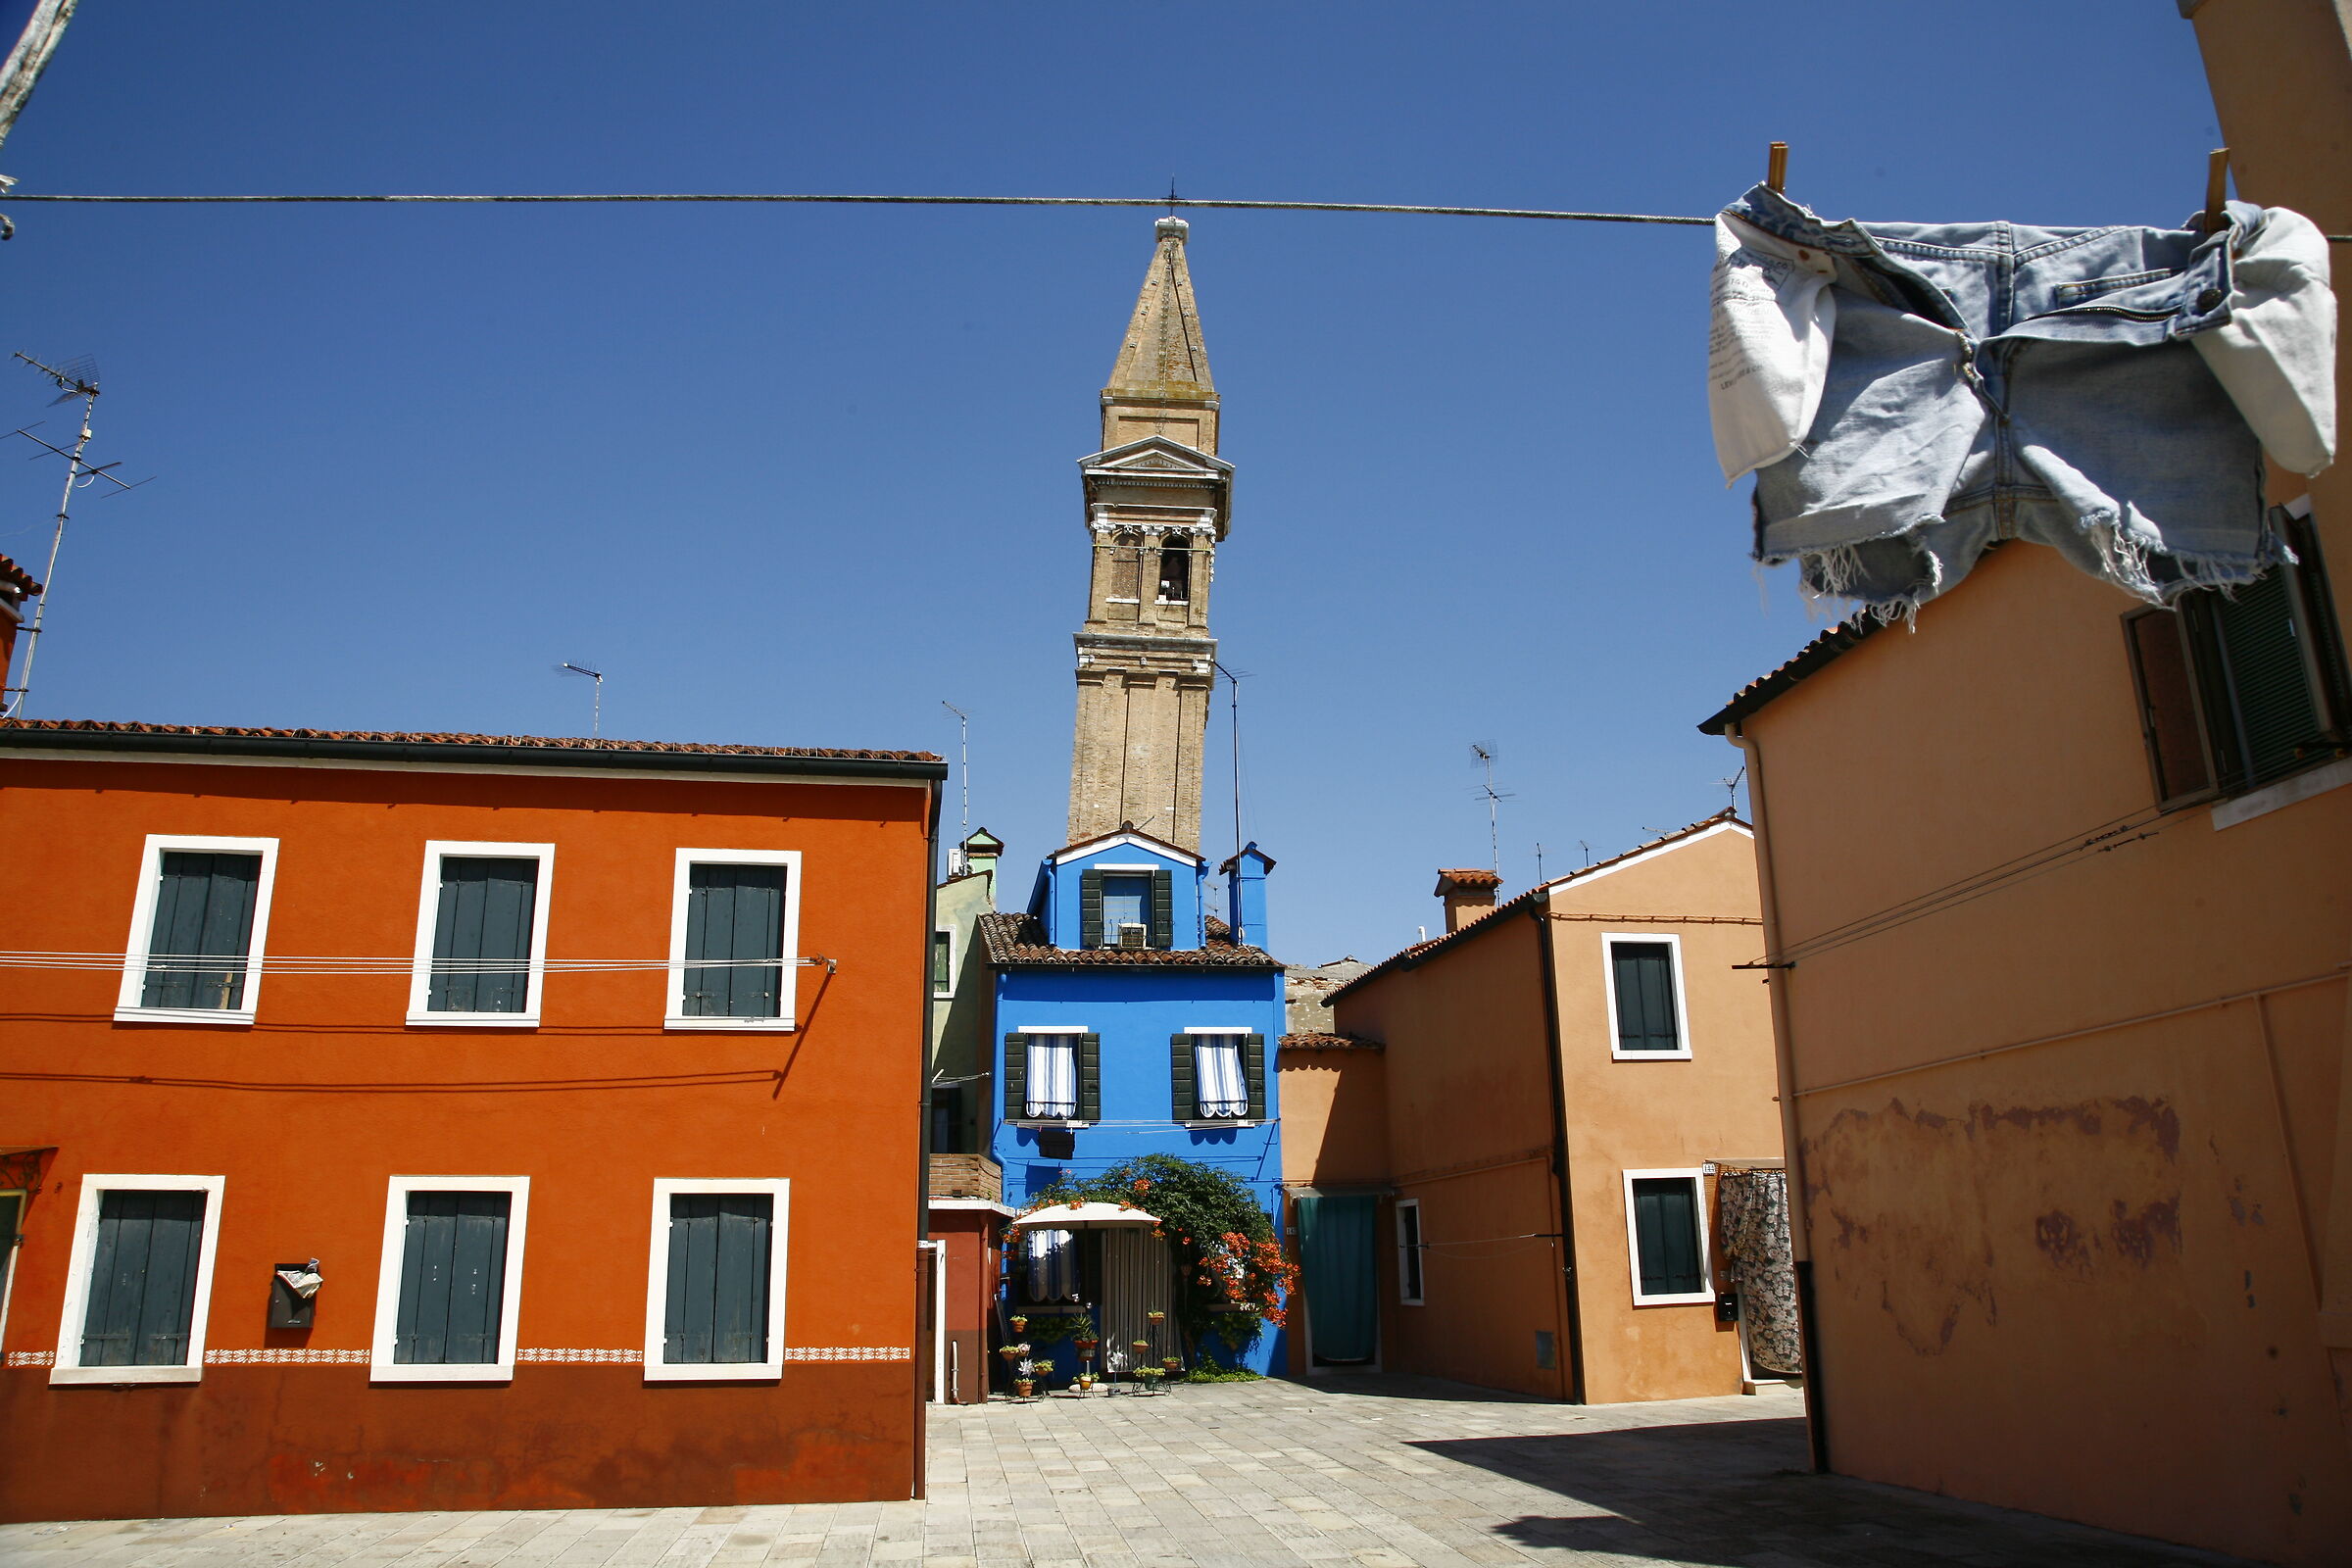 Burano and its colors 2...